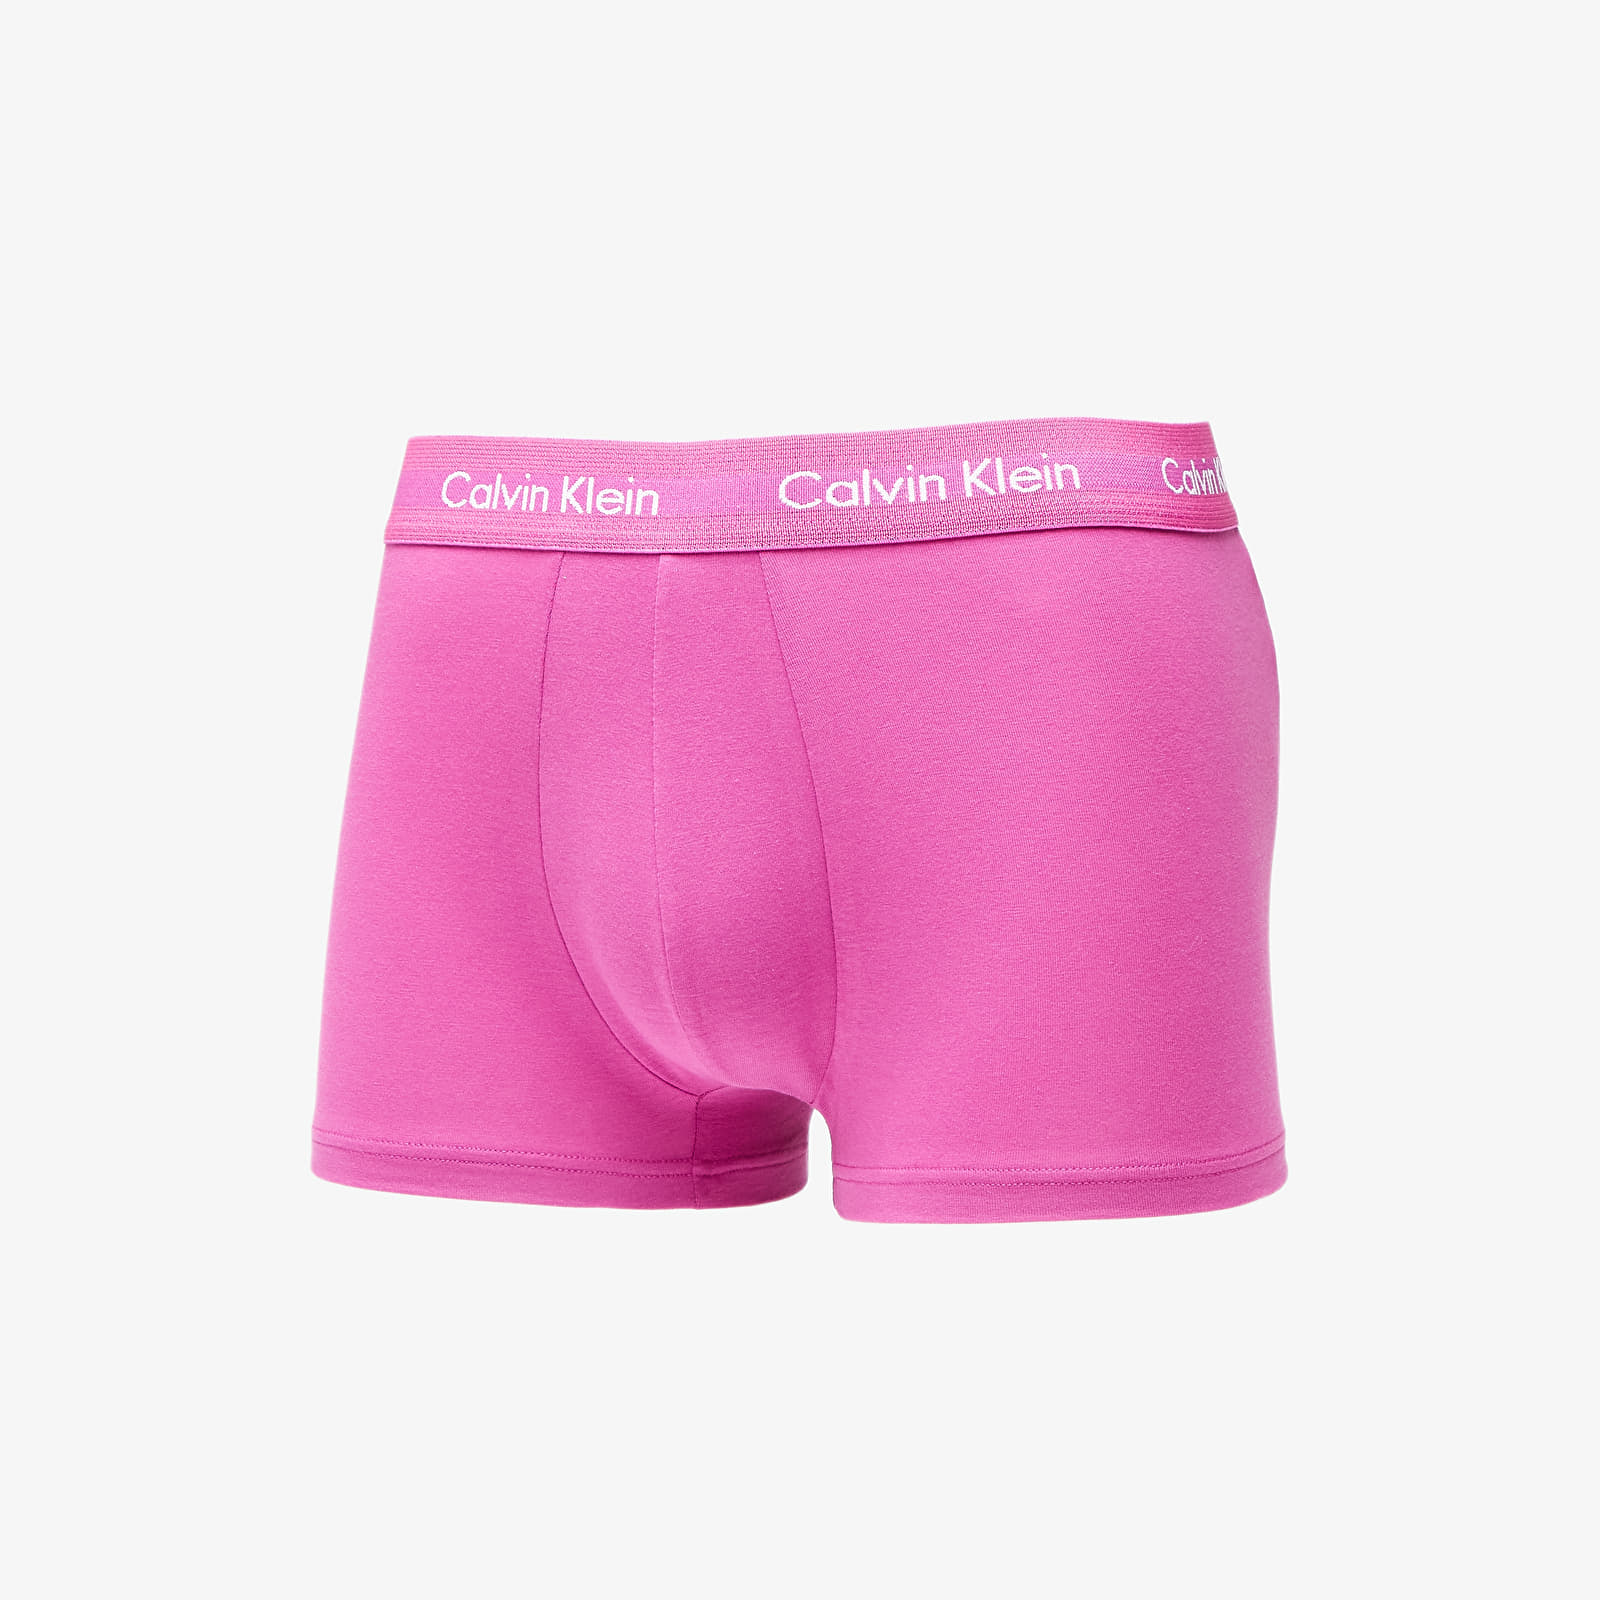 Boxer shorts Calvin Klein Cotton Stretch Low Rise Trunk 3-Pack